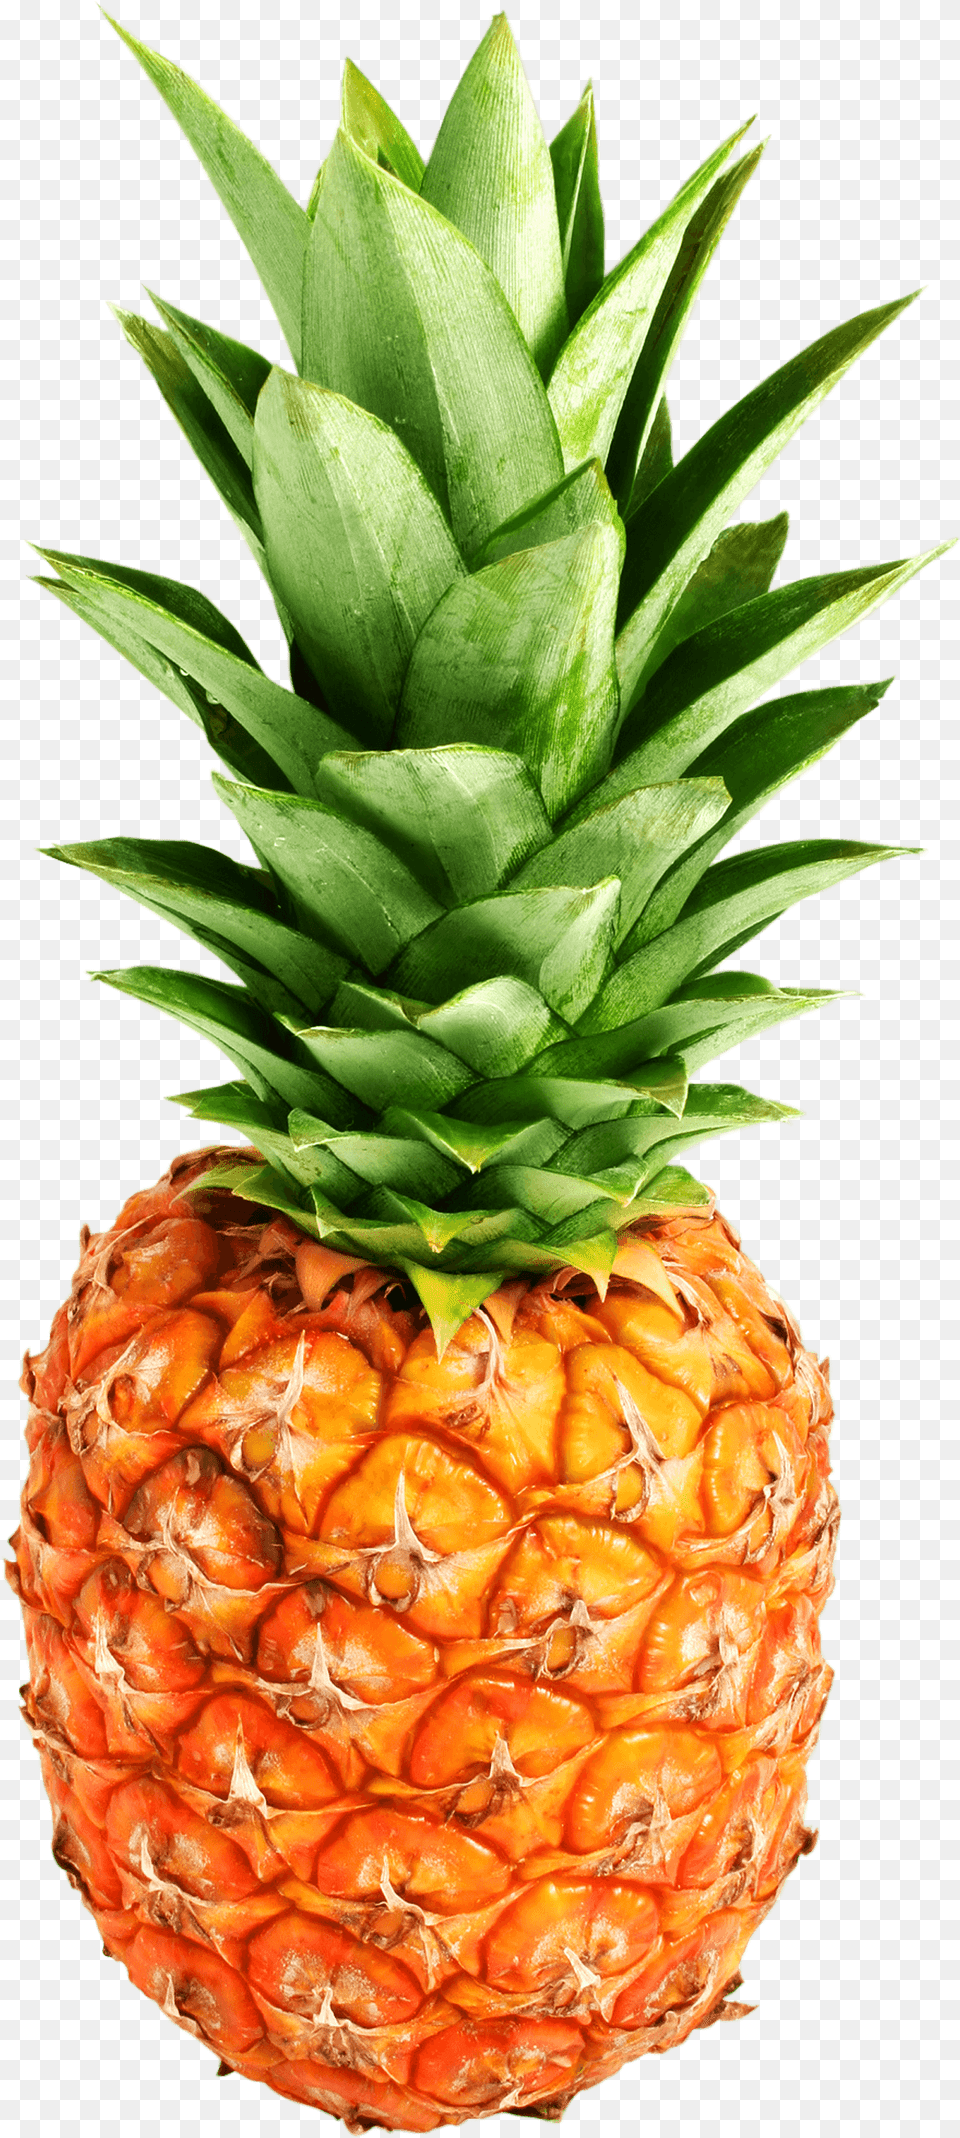 Pineapple Photo Pineapple Background, Food, Fruit, Plant, Produce Free Transparent Png